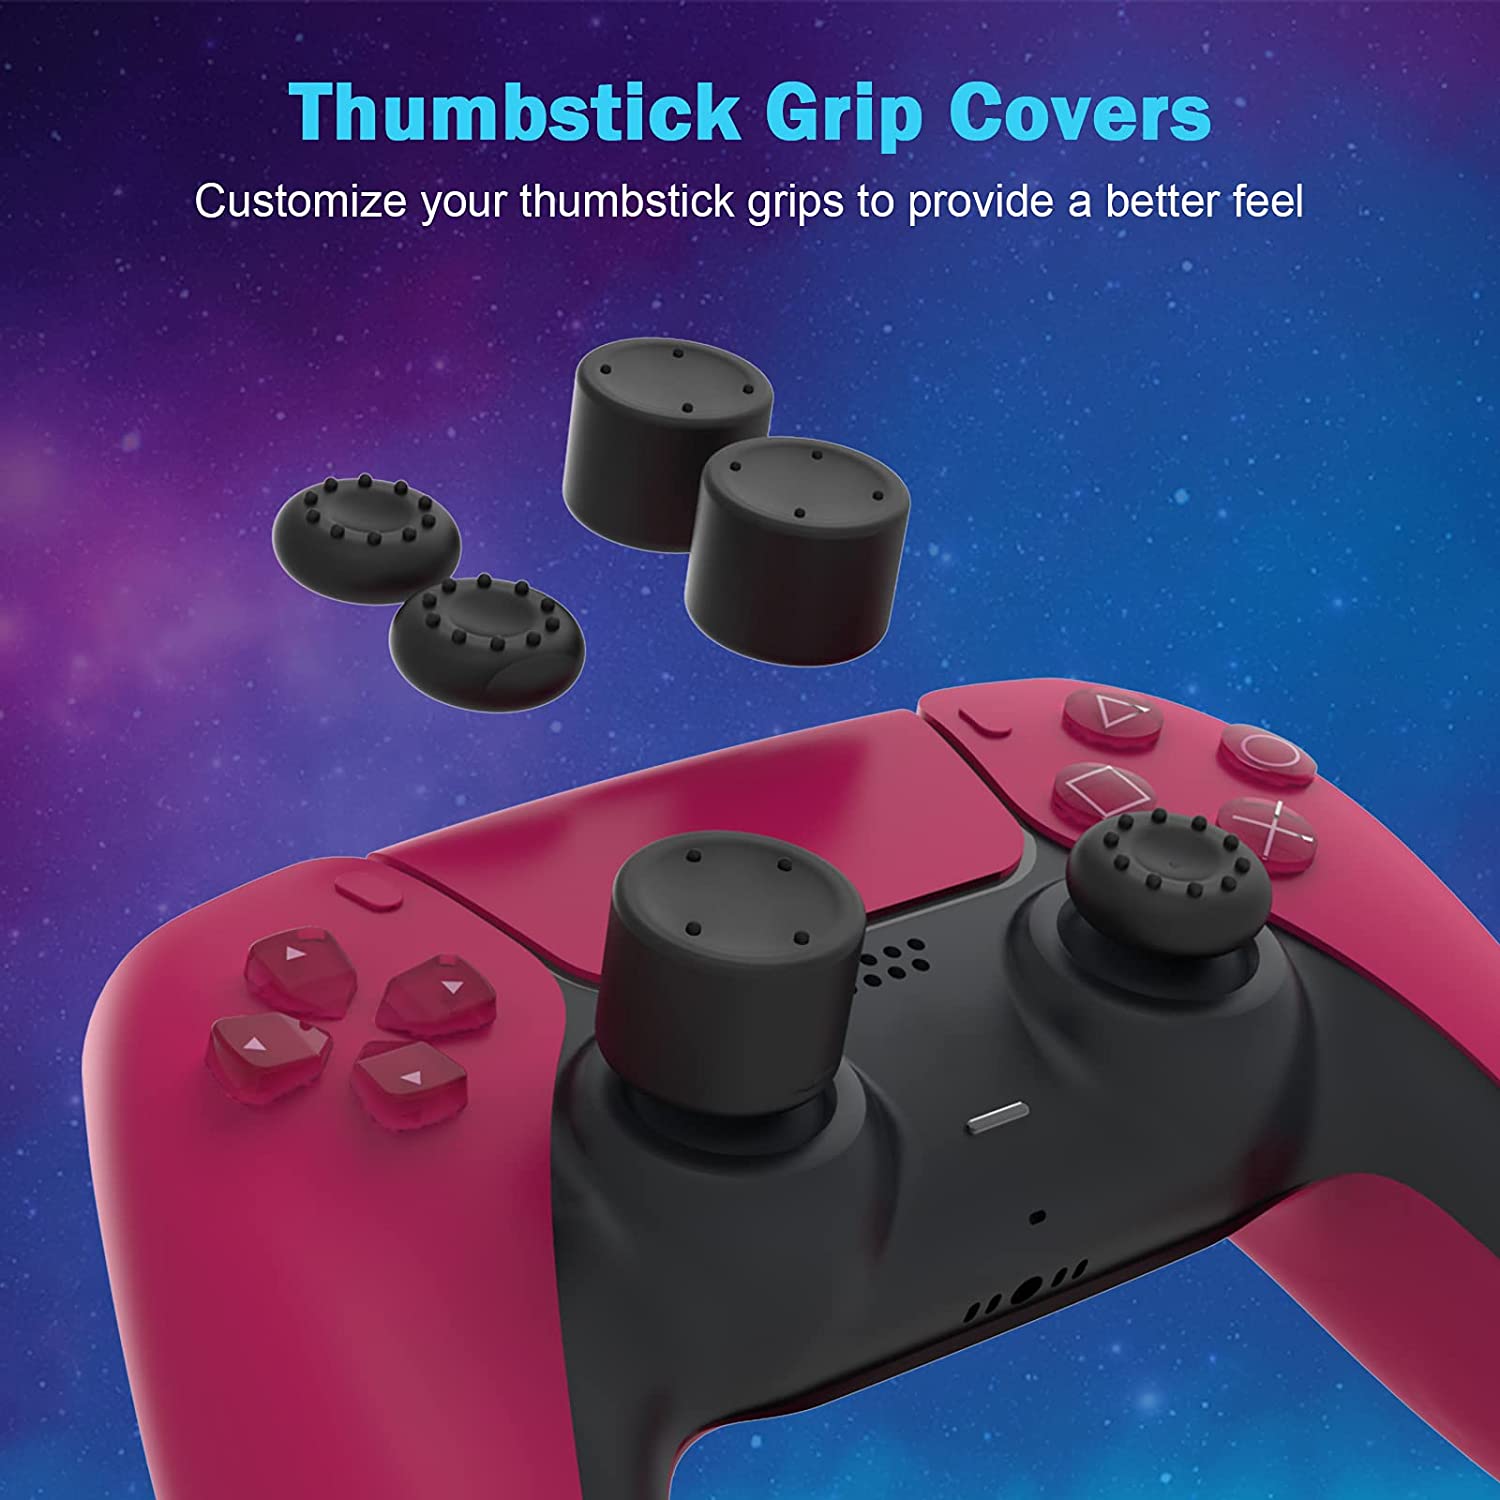 The product comes with 2 sets of Thumbstick Grip Covers of different heights for a better feel